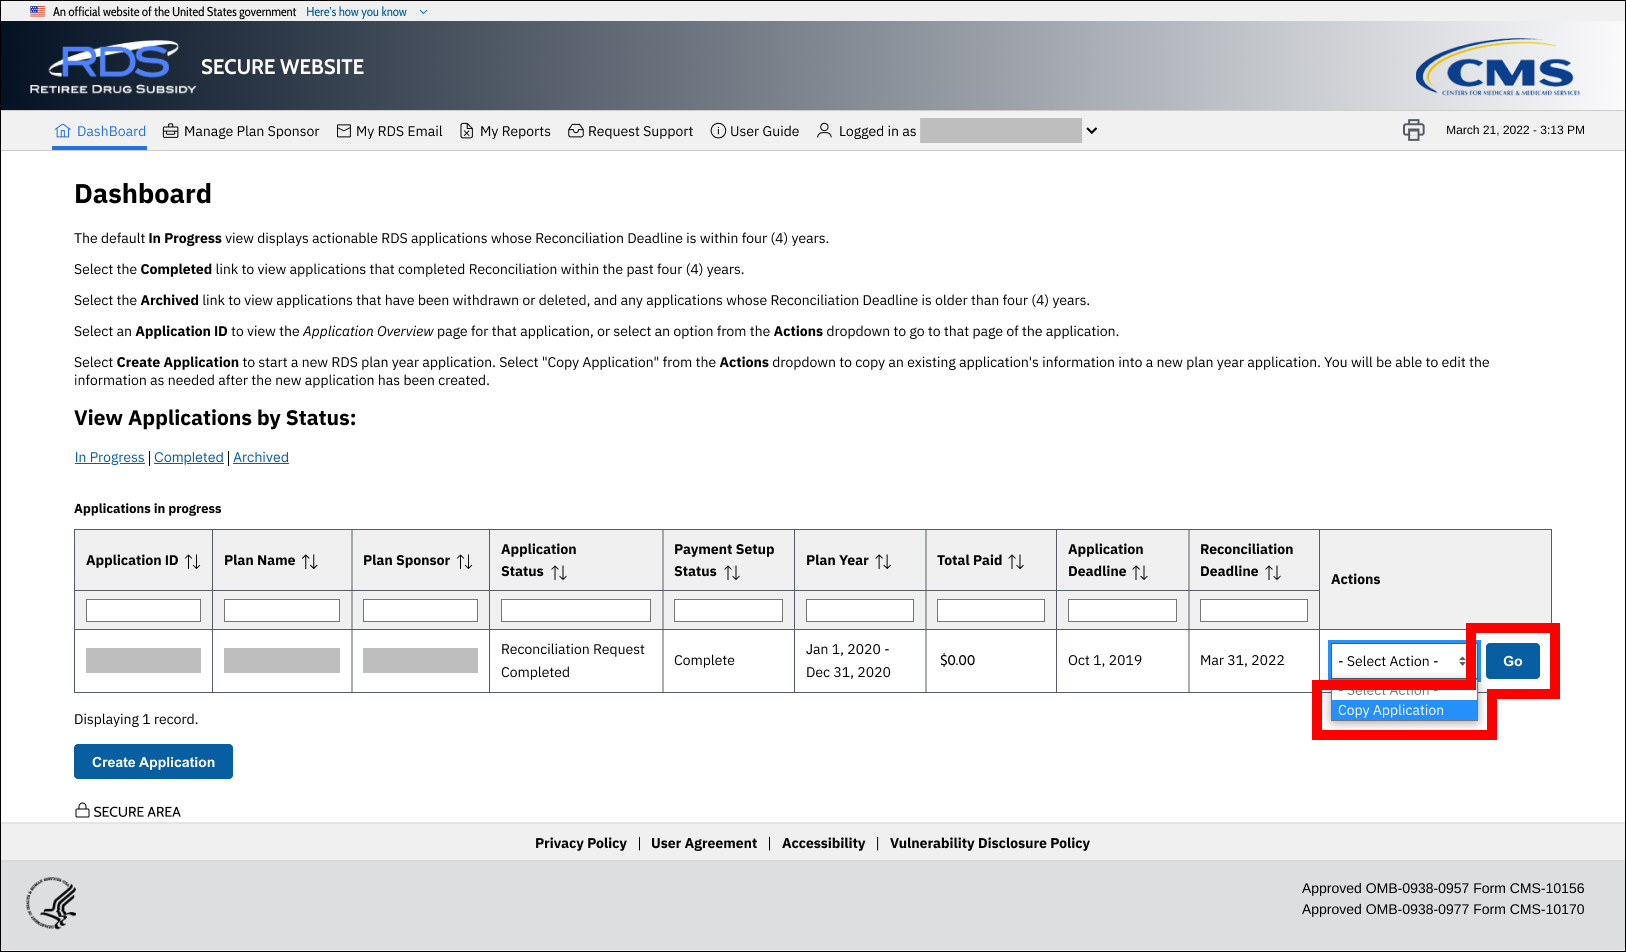 Dashboard page with sample data. Actions dropdown menu selection and Go button are highlighted.